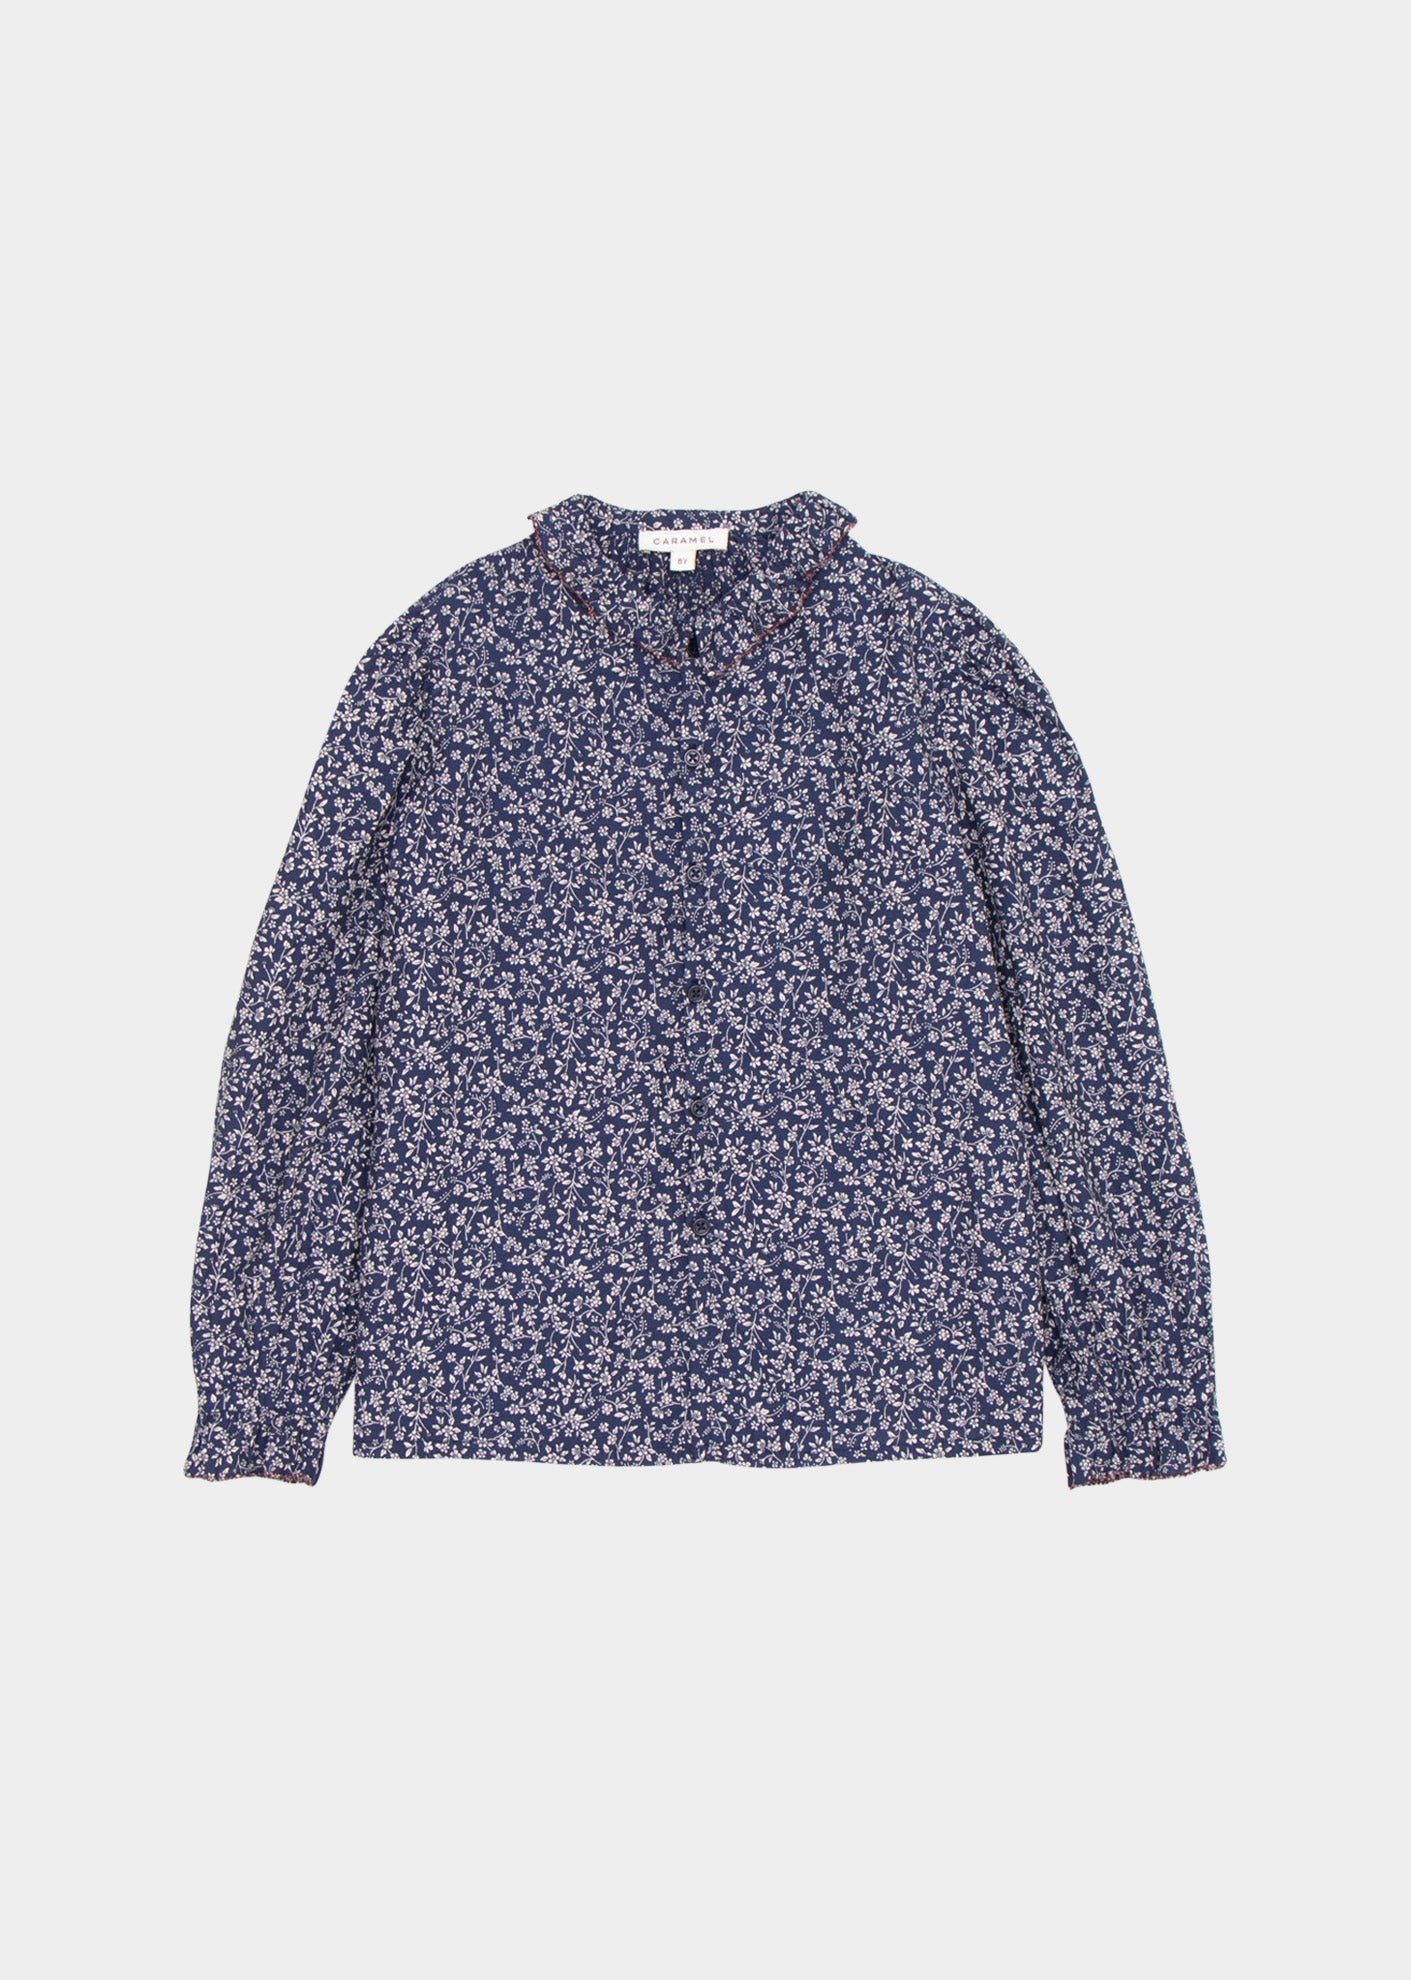 MADISON GIRL BLOUSE - NAVY FLORAL